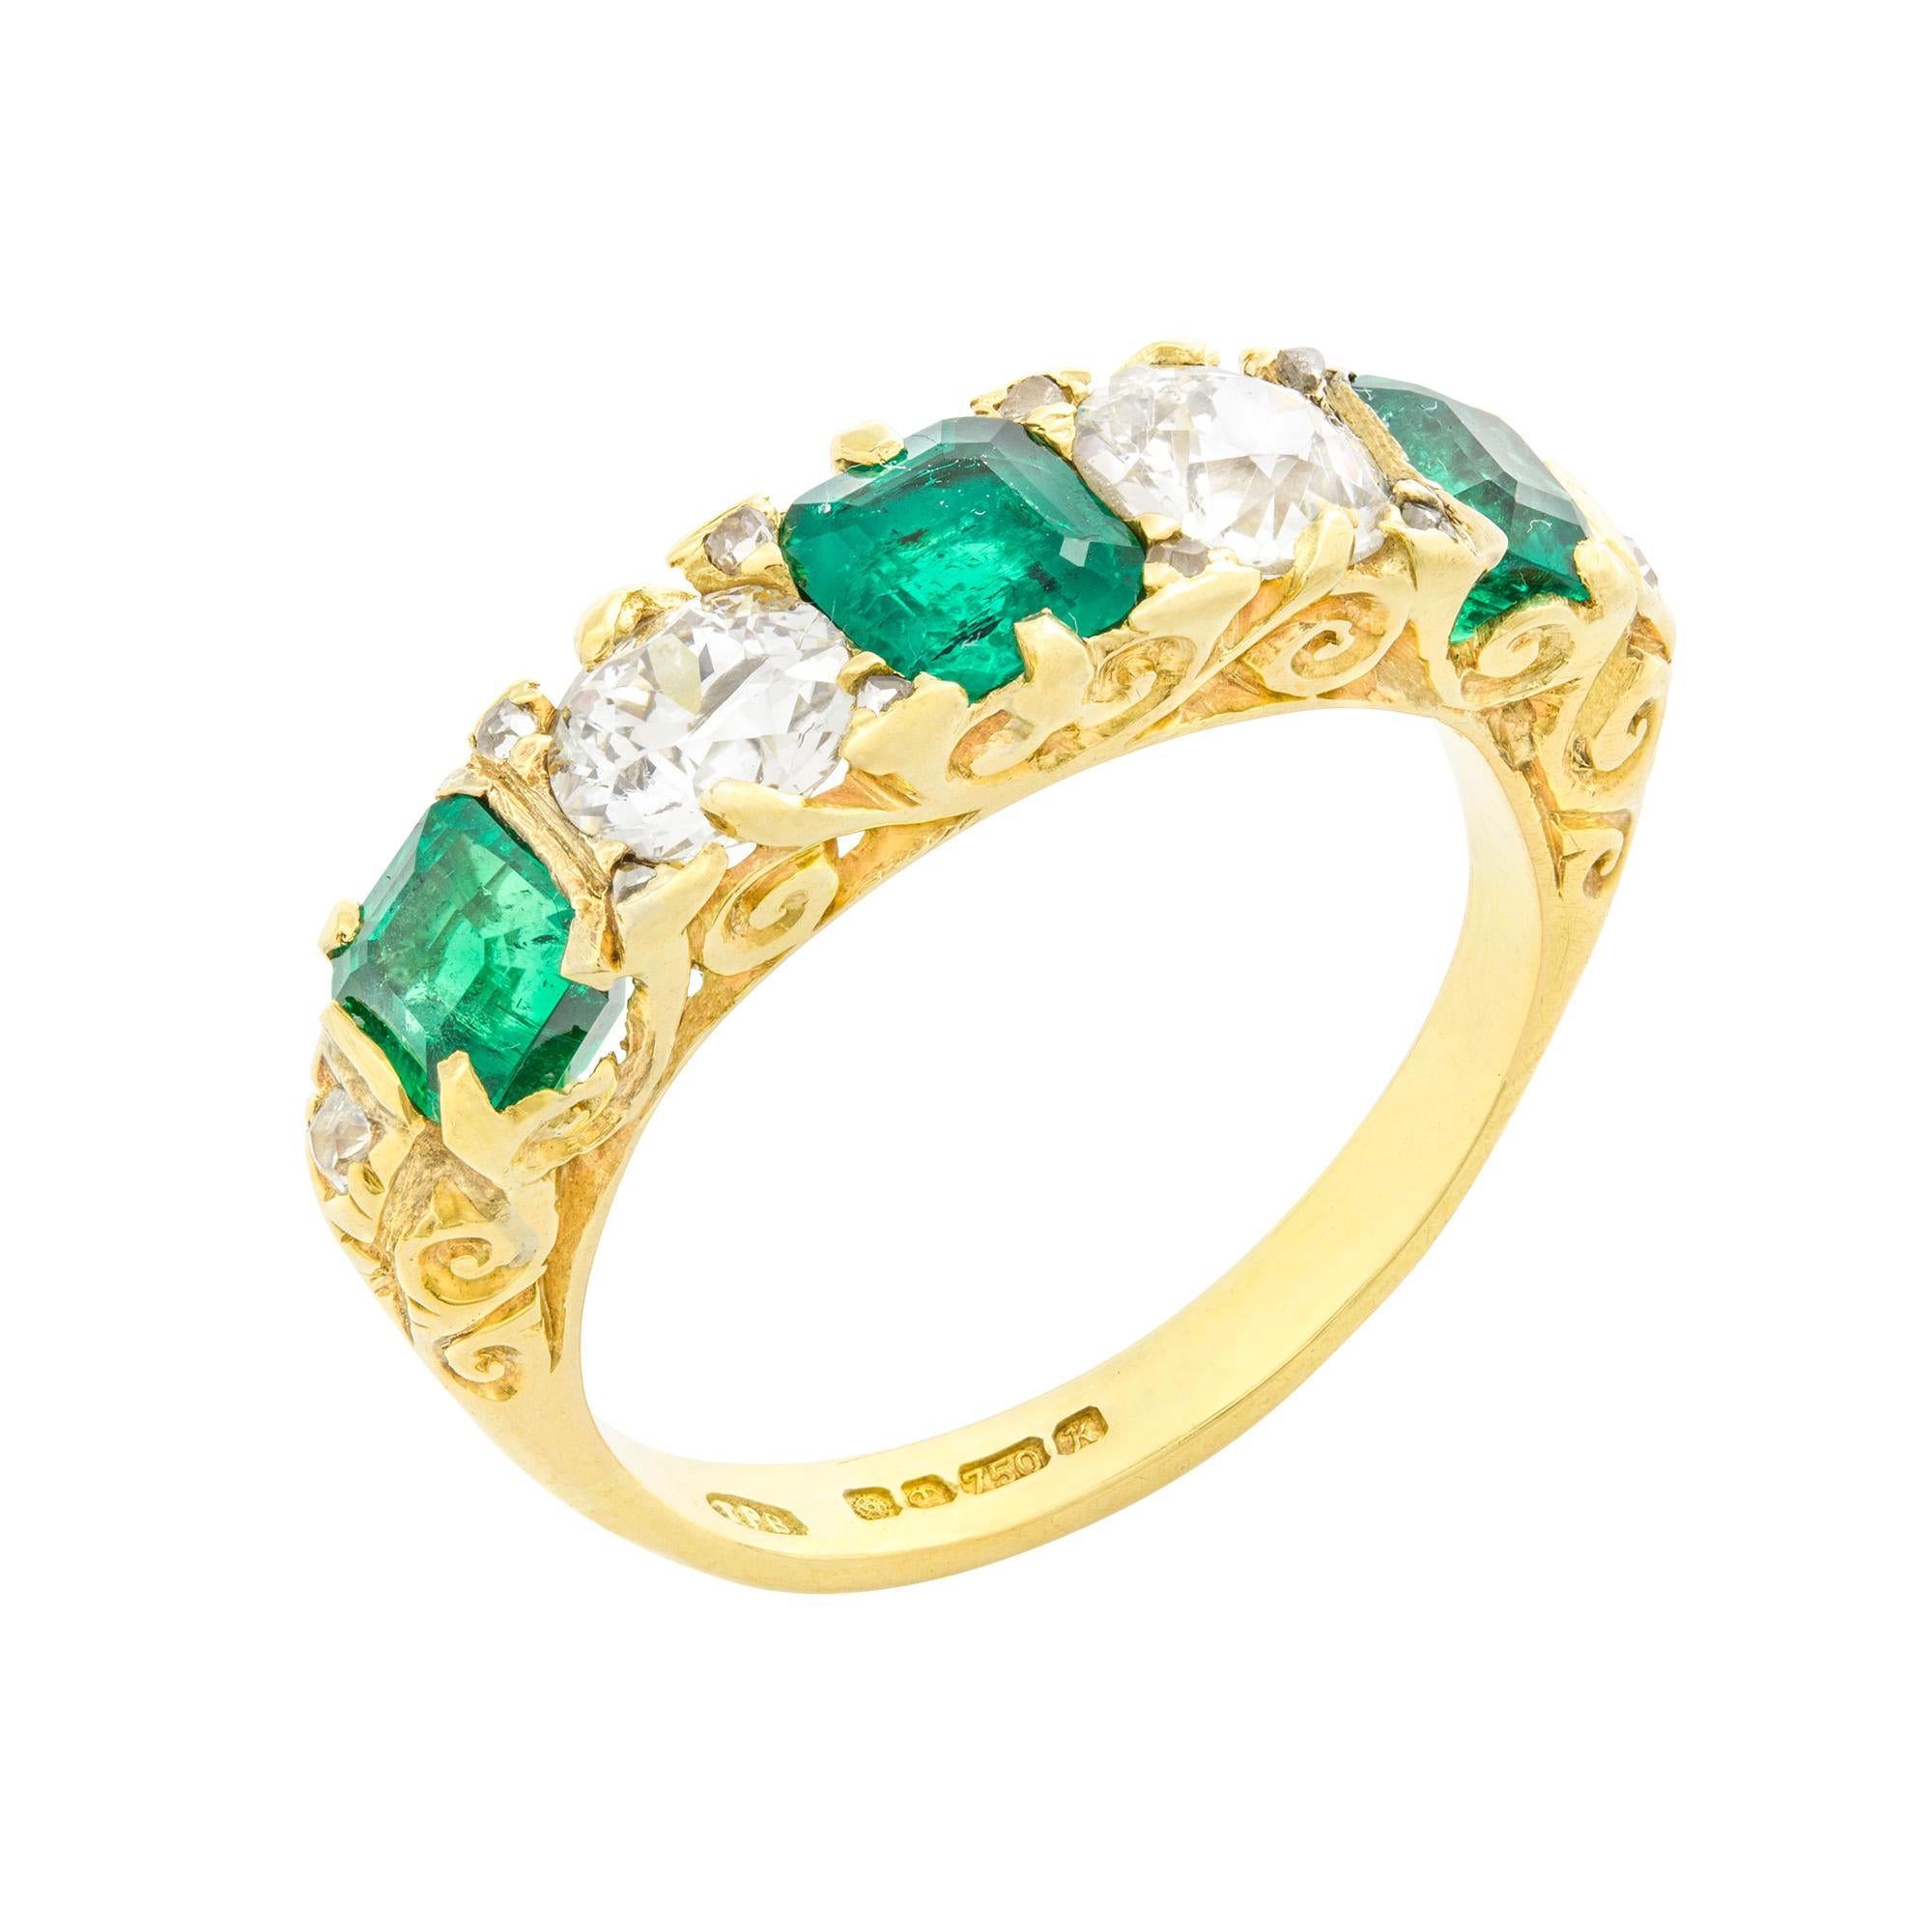 An emerald and diamond five-stone Victorian style ring, the three old octagonal-cut emeralds weighing 1.29 carats, accompanied by GCS report stating to be of Colombian origin, claw set between two old European-cut diamonds each estimated to weigh